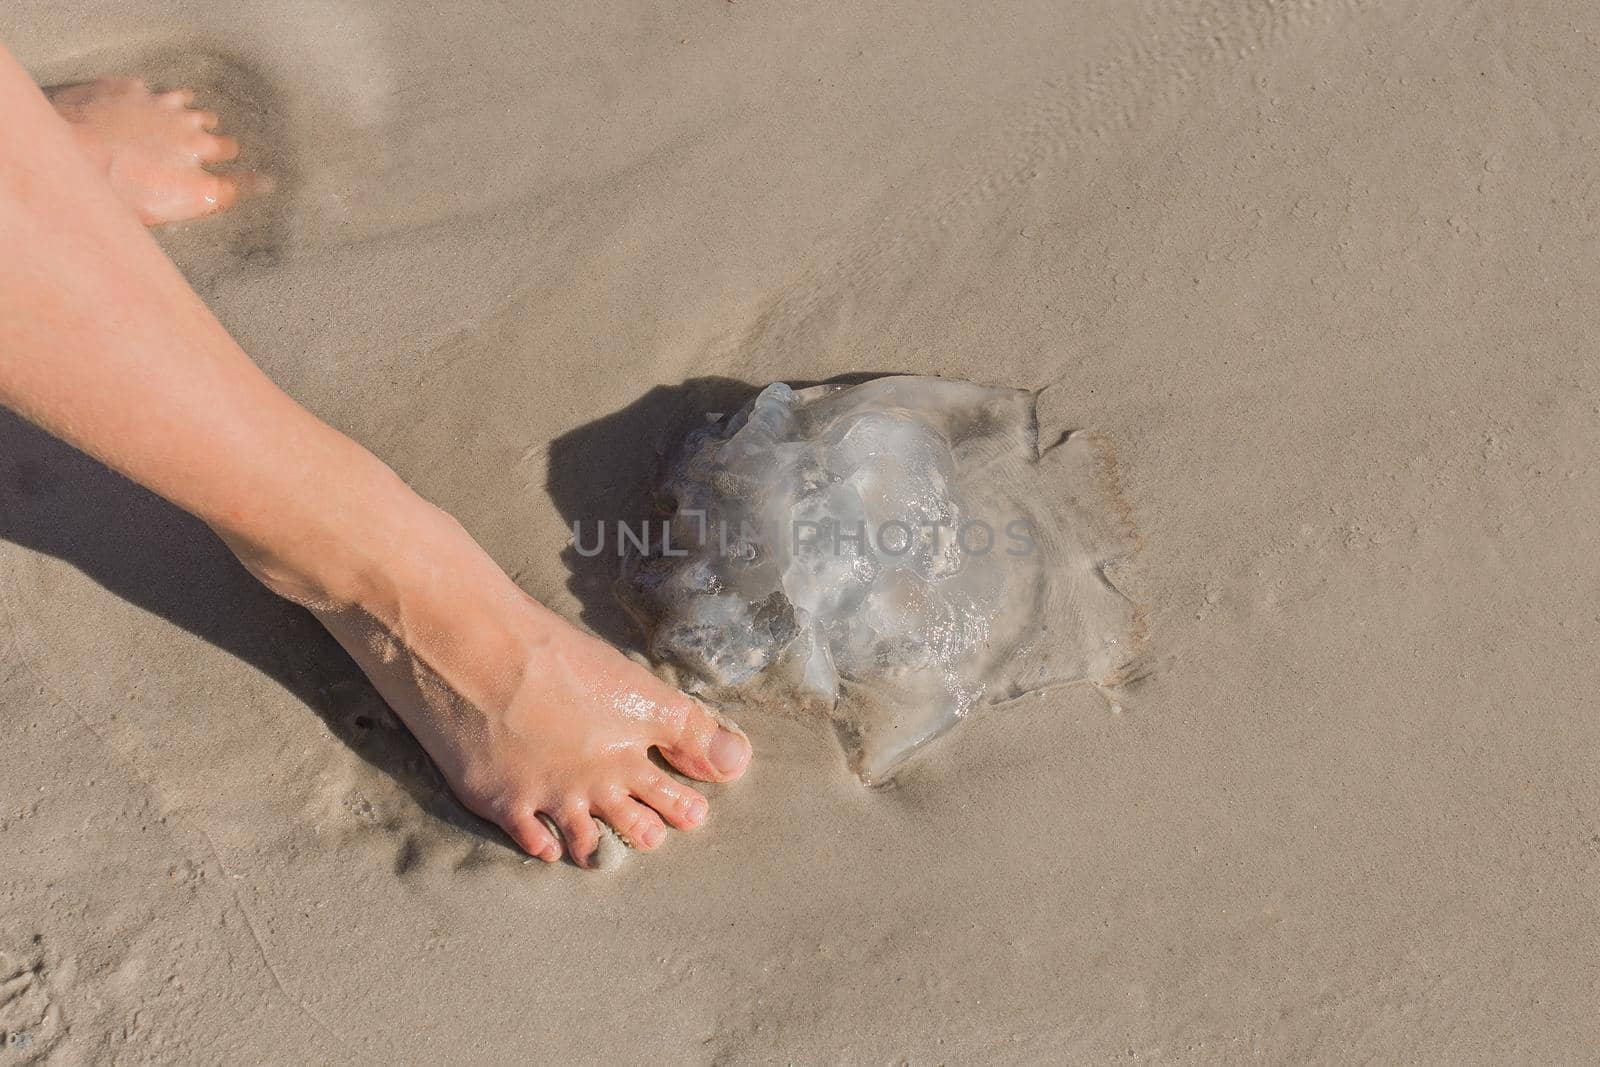 The girl's foot stands next to a jellyfish on the sand of the sea beach.